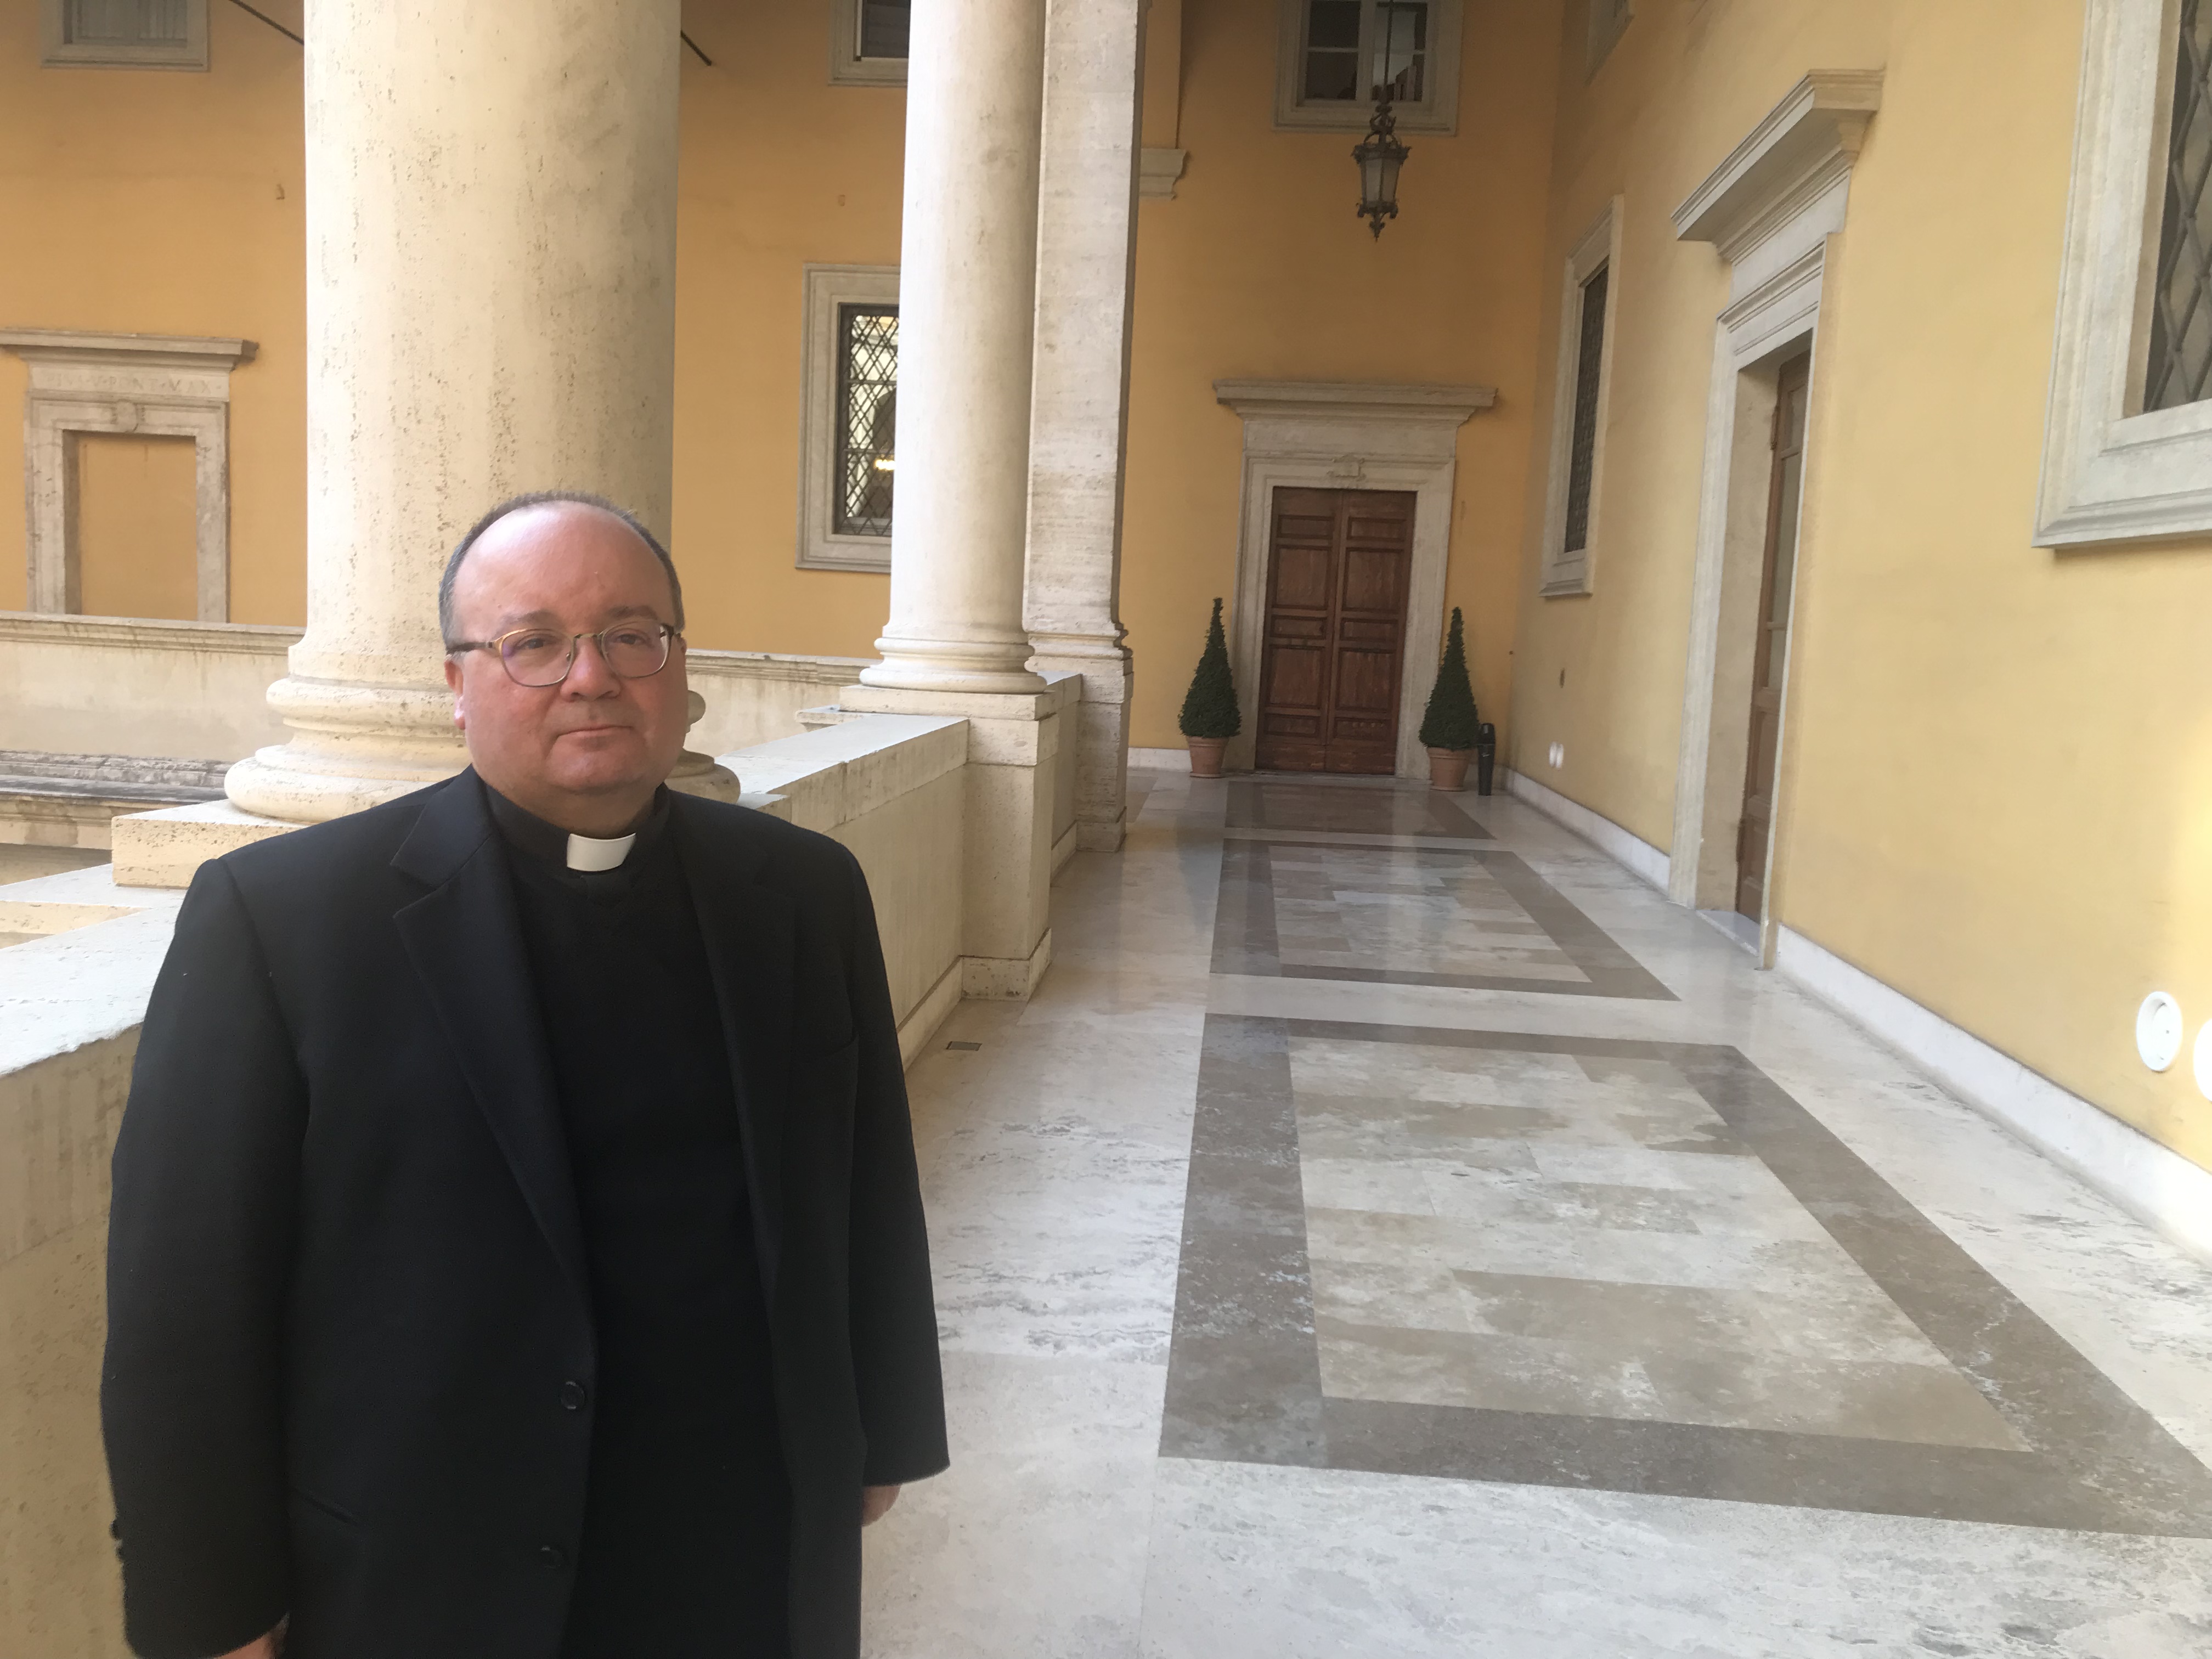 Voices of survivors are the wounds inflicted on Christ by the Church, says Scicluna 